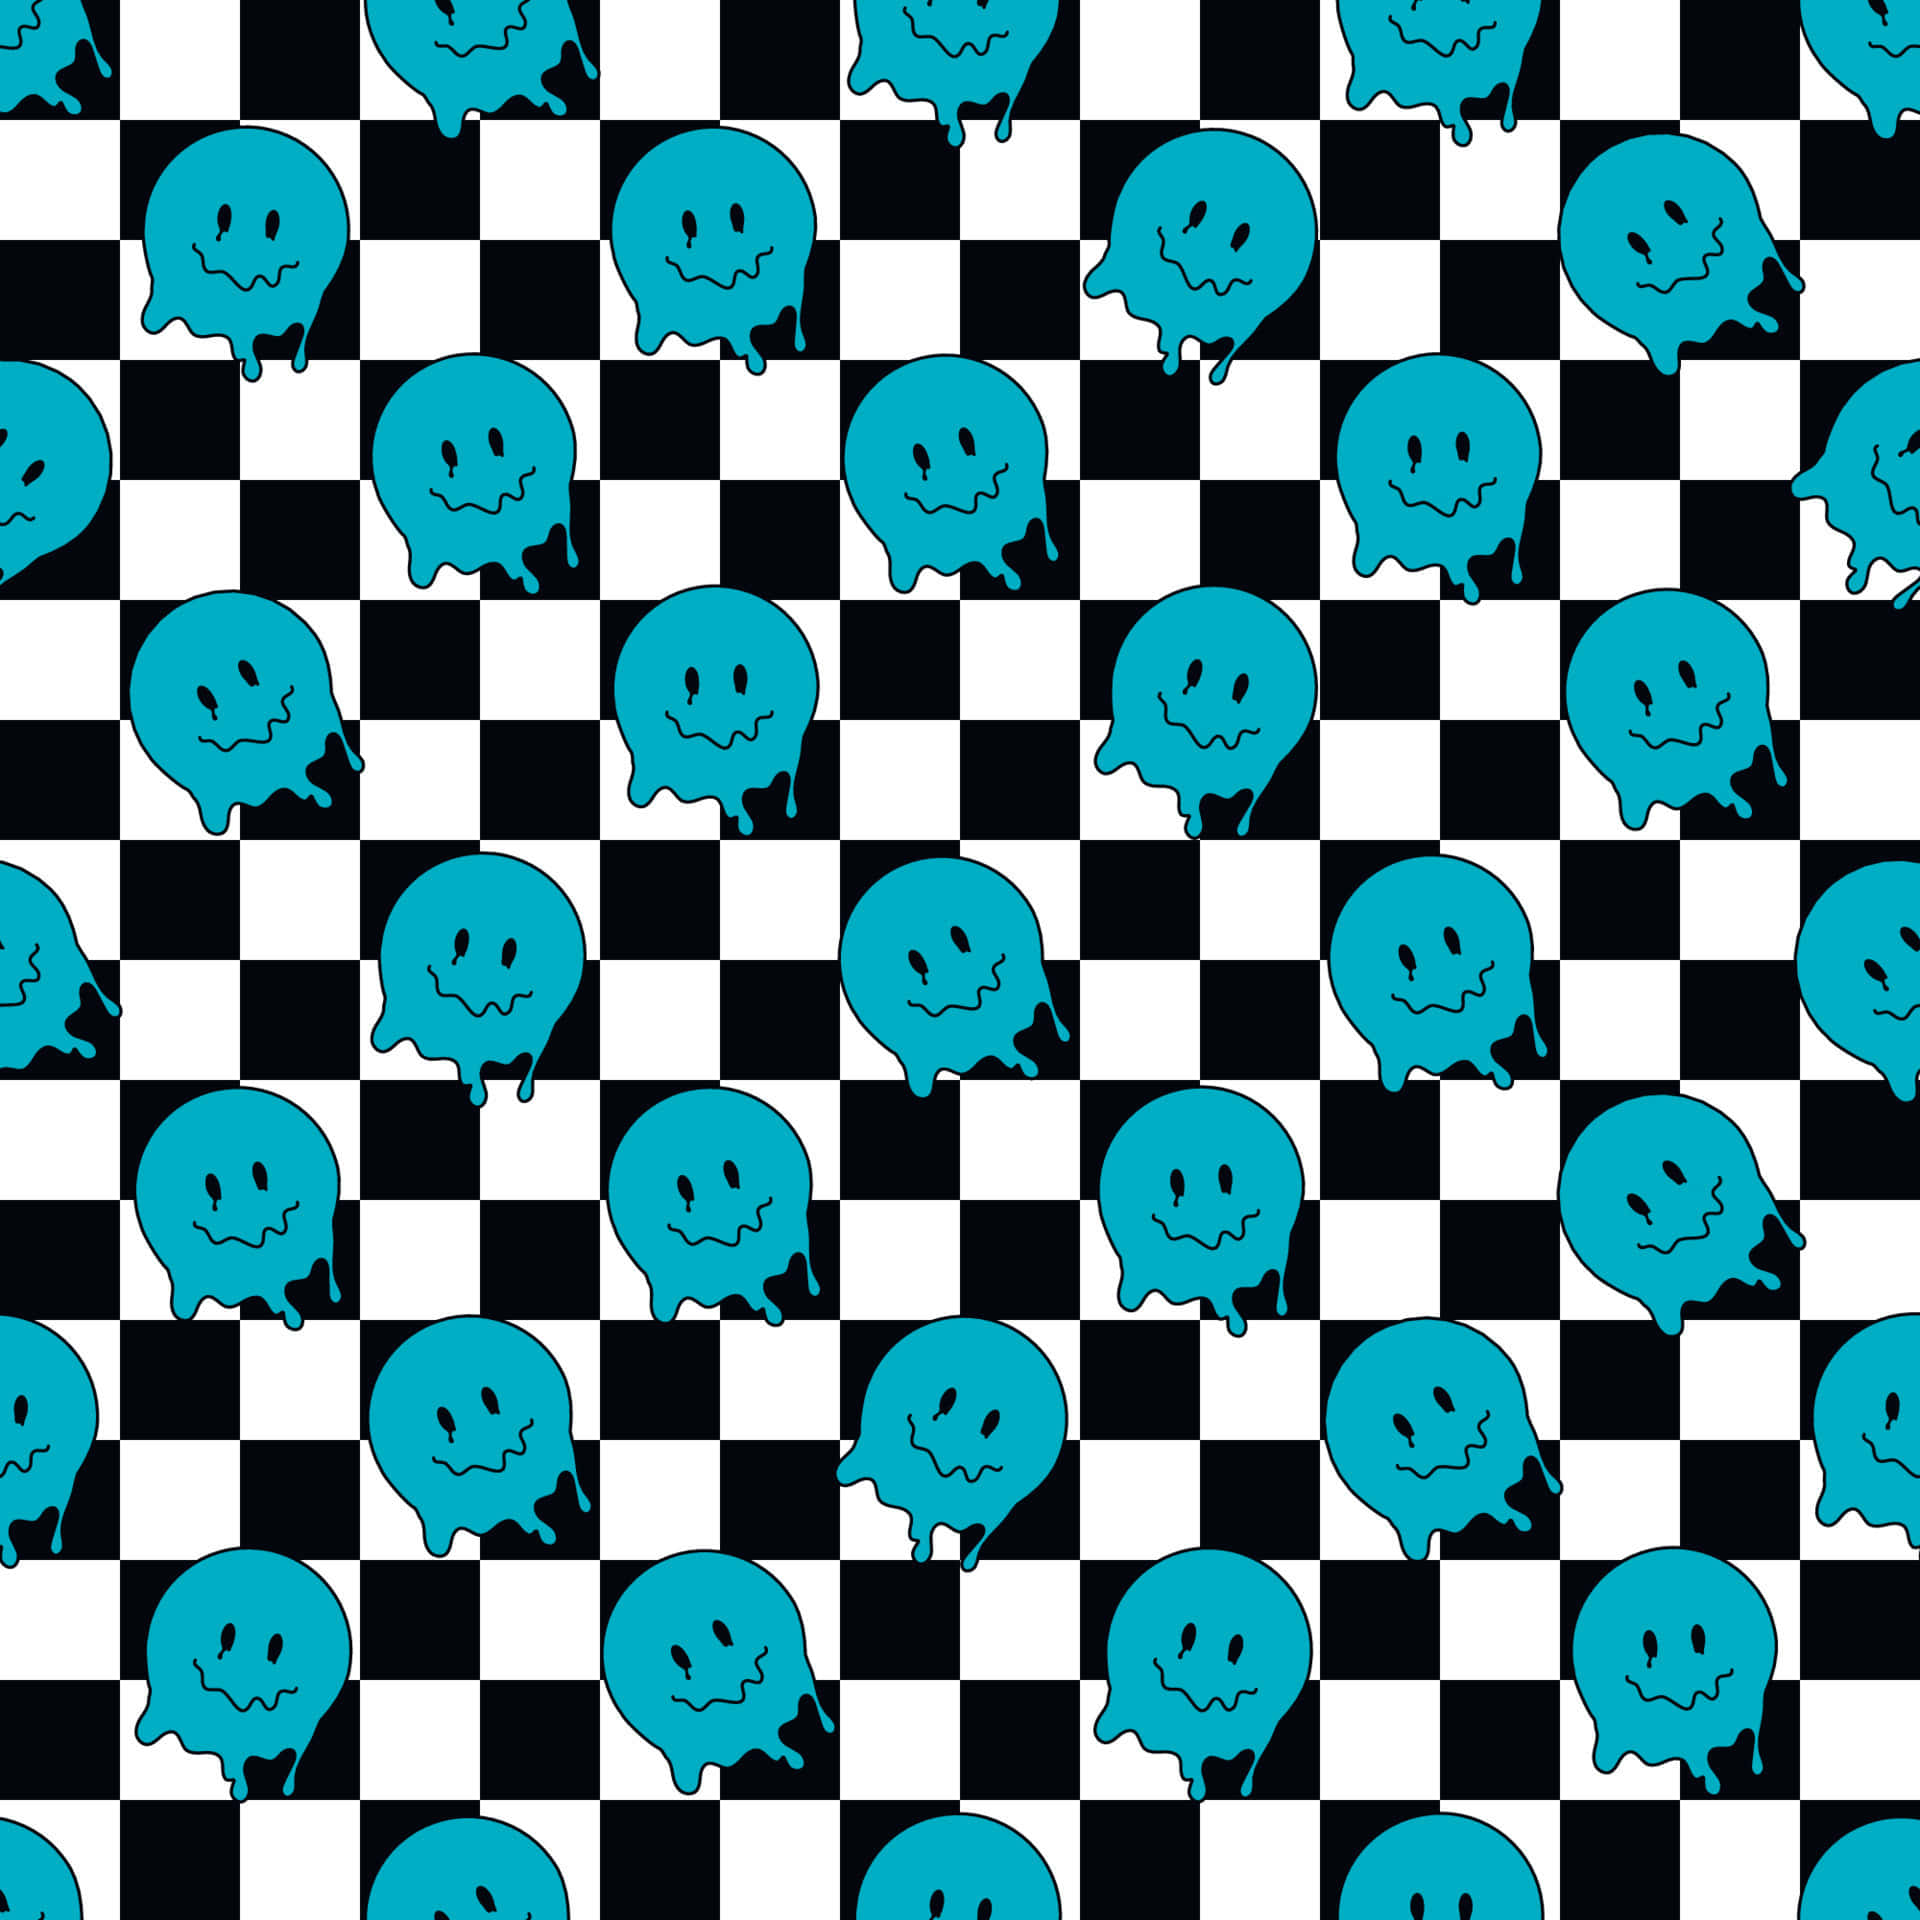 Simple smiley face wallpaper  Iphone wallpaper blur Preppy wallpaper  Phone wallpaper patterns